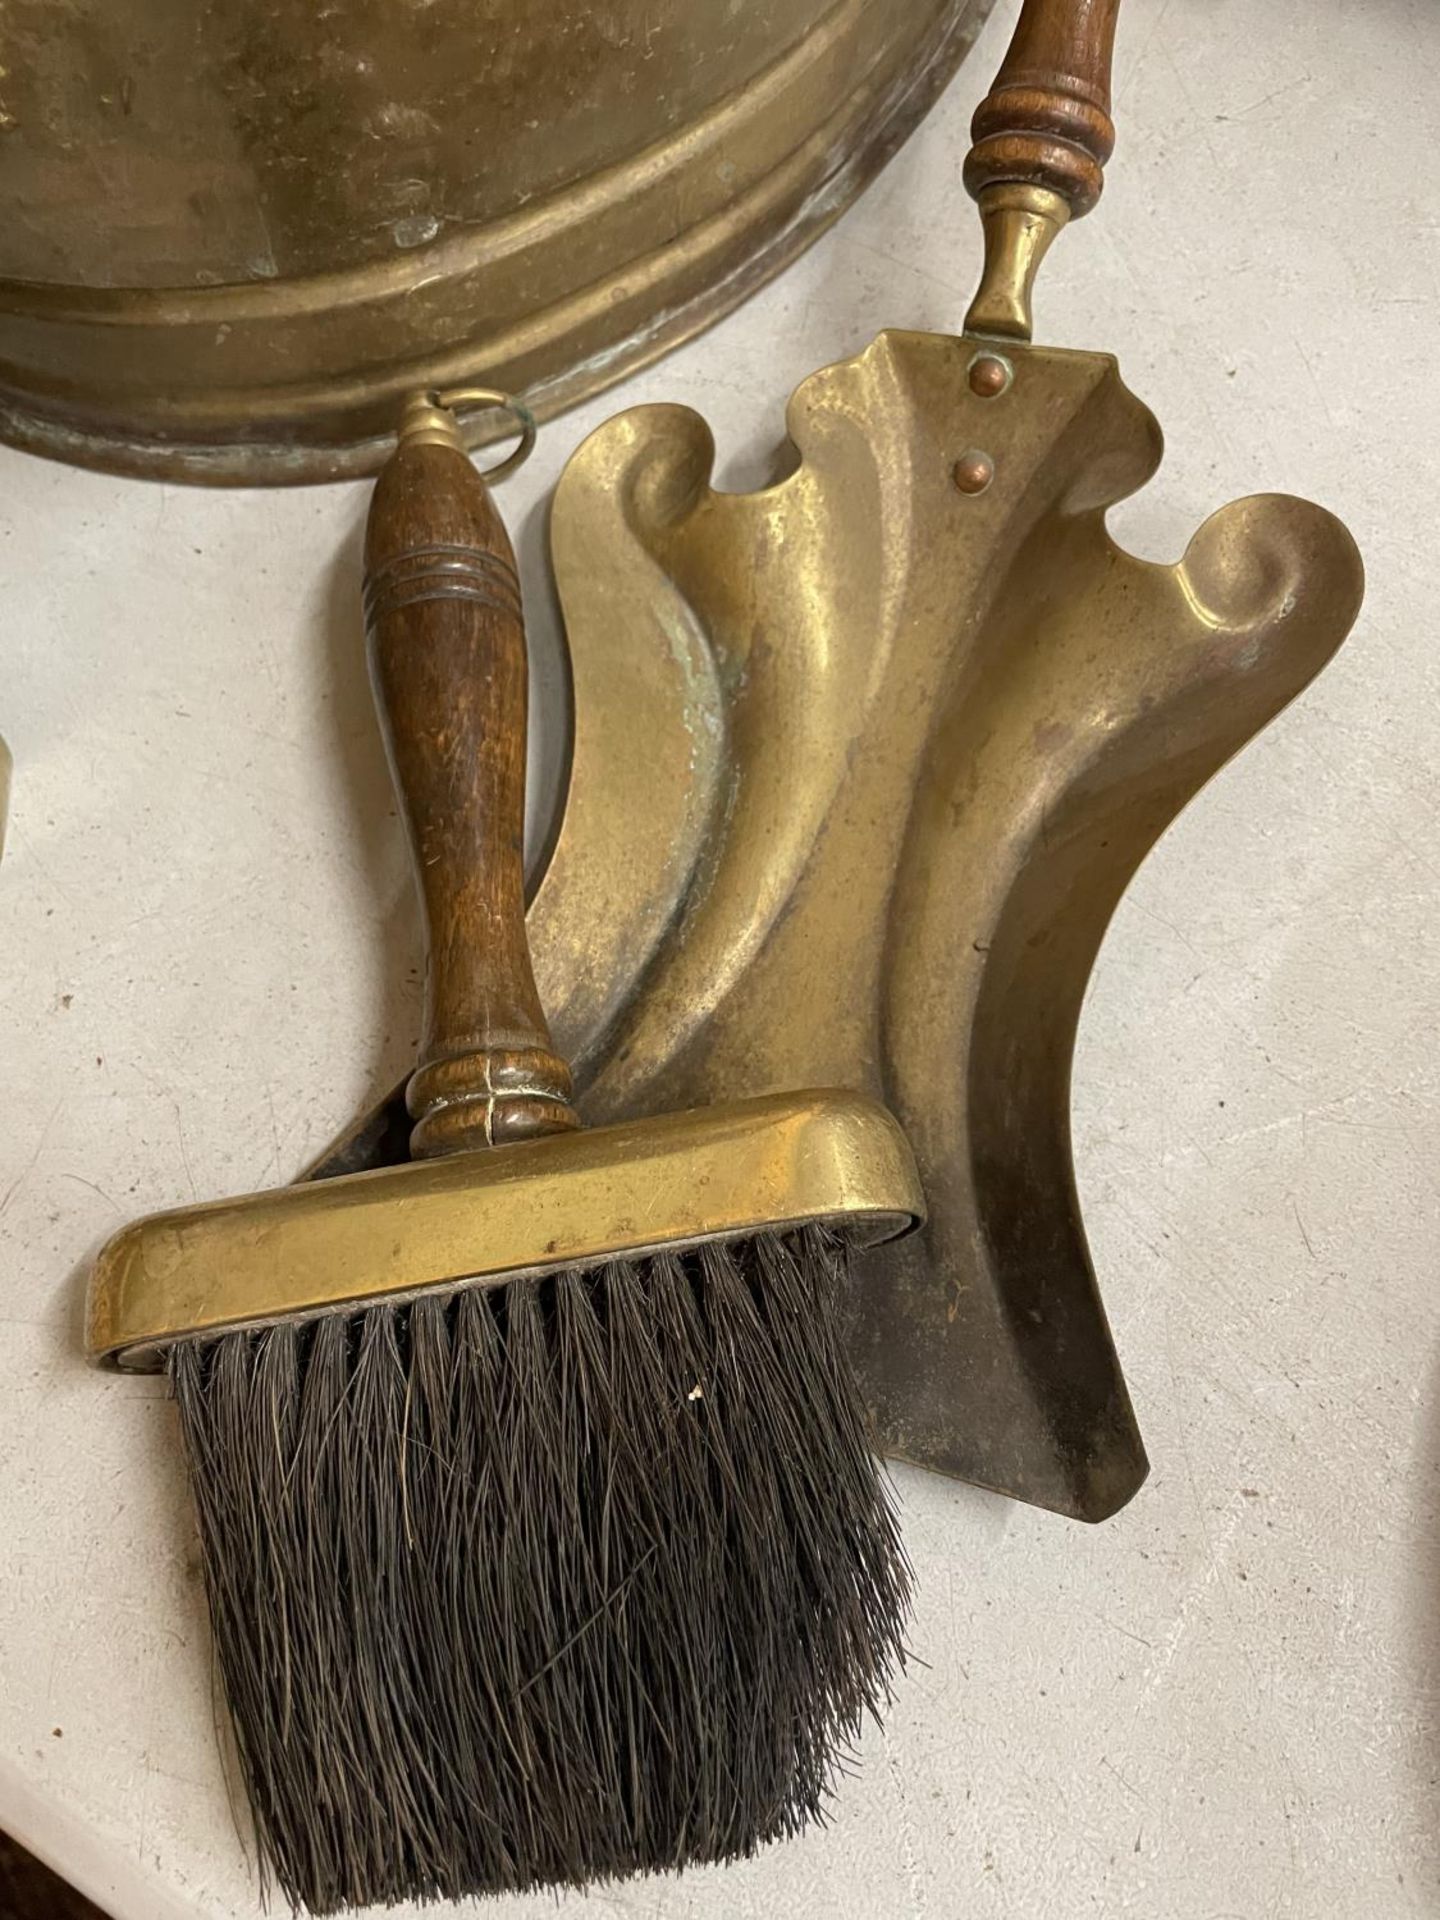 VARIOUS BRASS ITEMS TO INCLUDE A LARGE COAL BUCKET, UNUSUAL SHOVEL, BRUSH, TONGS AND FIRE DOGS - Image 2 of 5